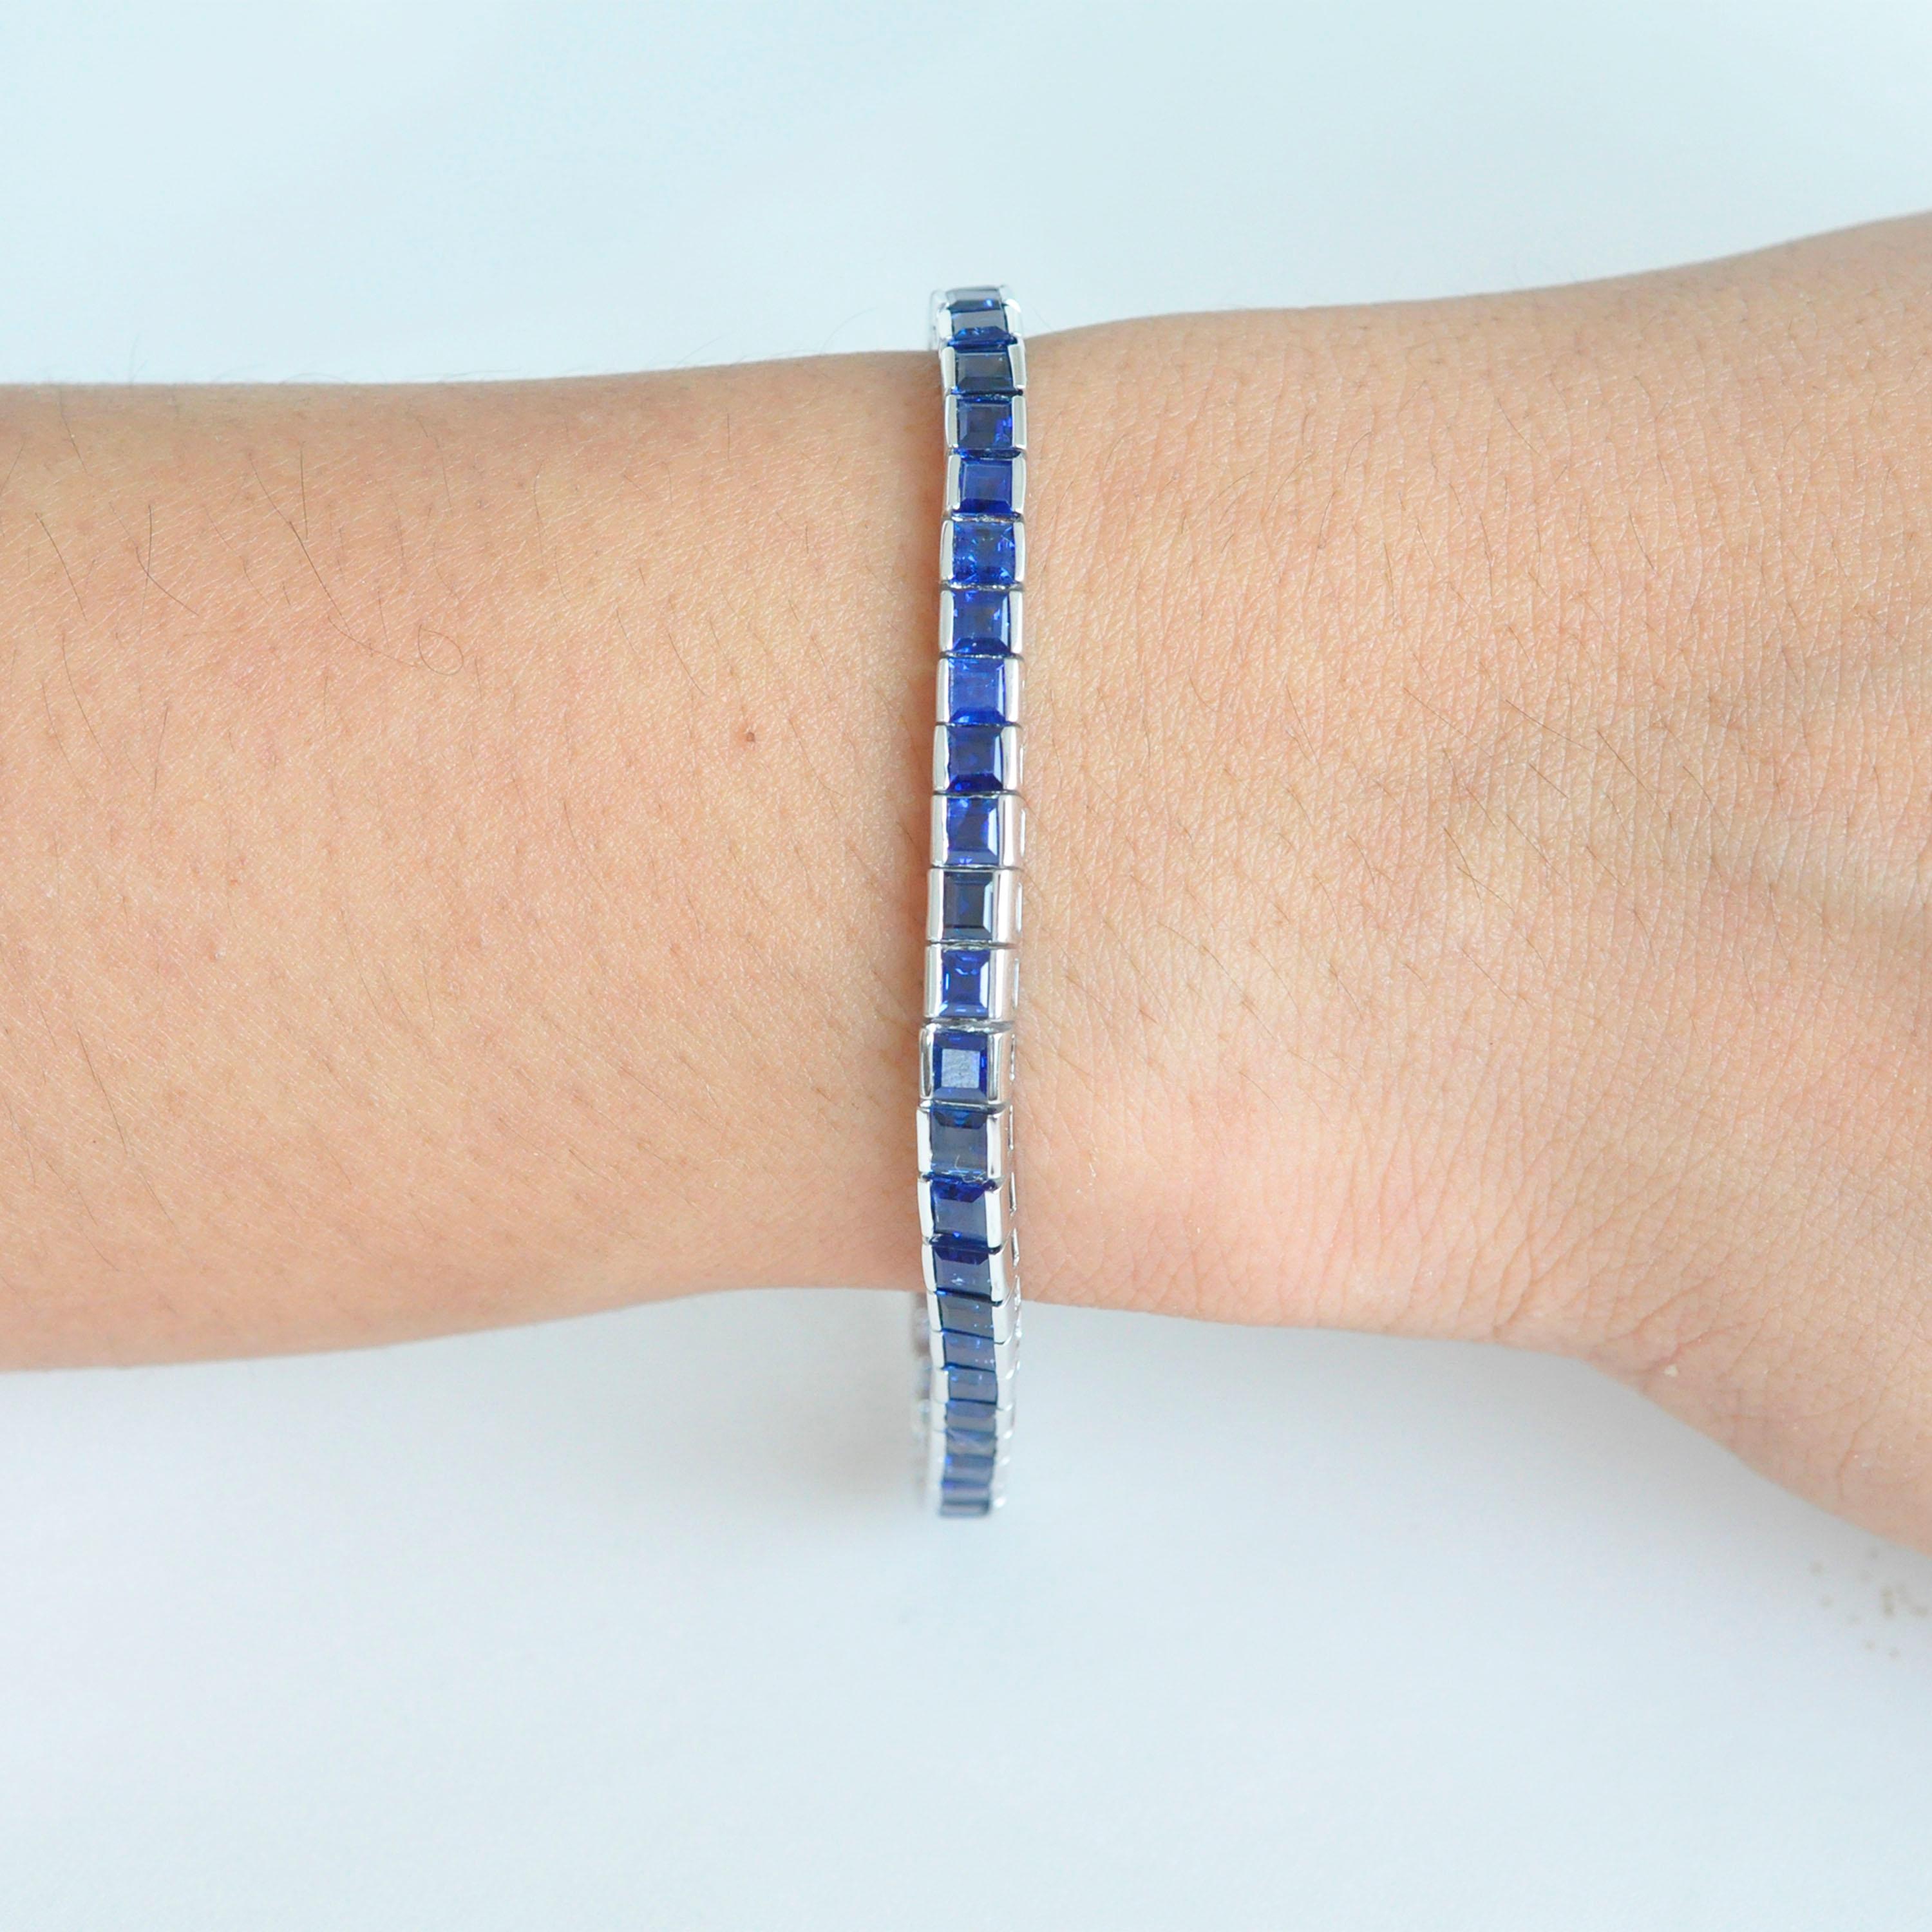 18 karat white gold 14.04 carat square natural blue sapphire tennis line bracelet.

This masterful royal blue sapphires tennis bracelet is superb. The identical 49 matching squares blue sapphires of size 4 mm in the center and graduating to 3.5 mm